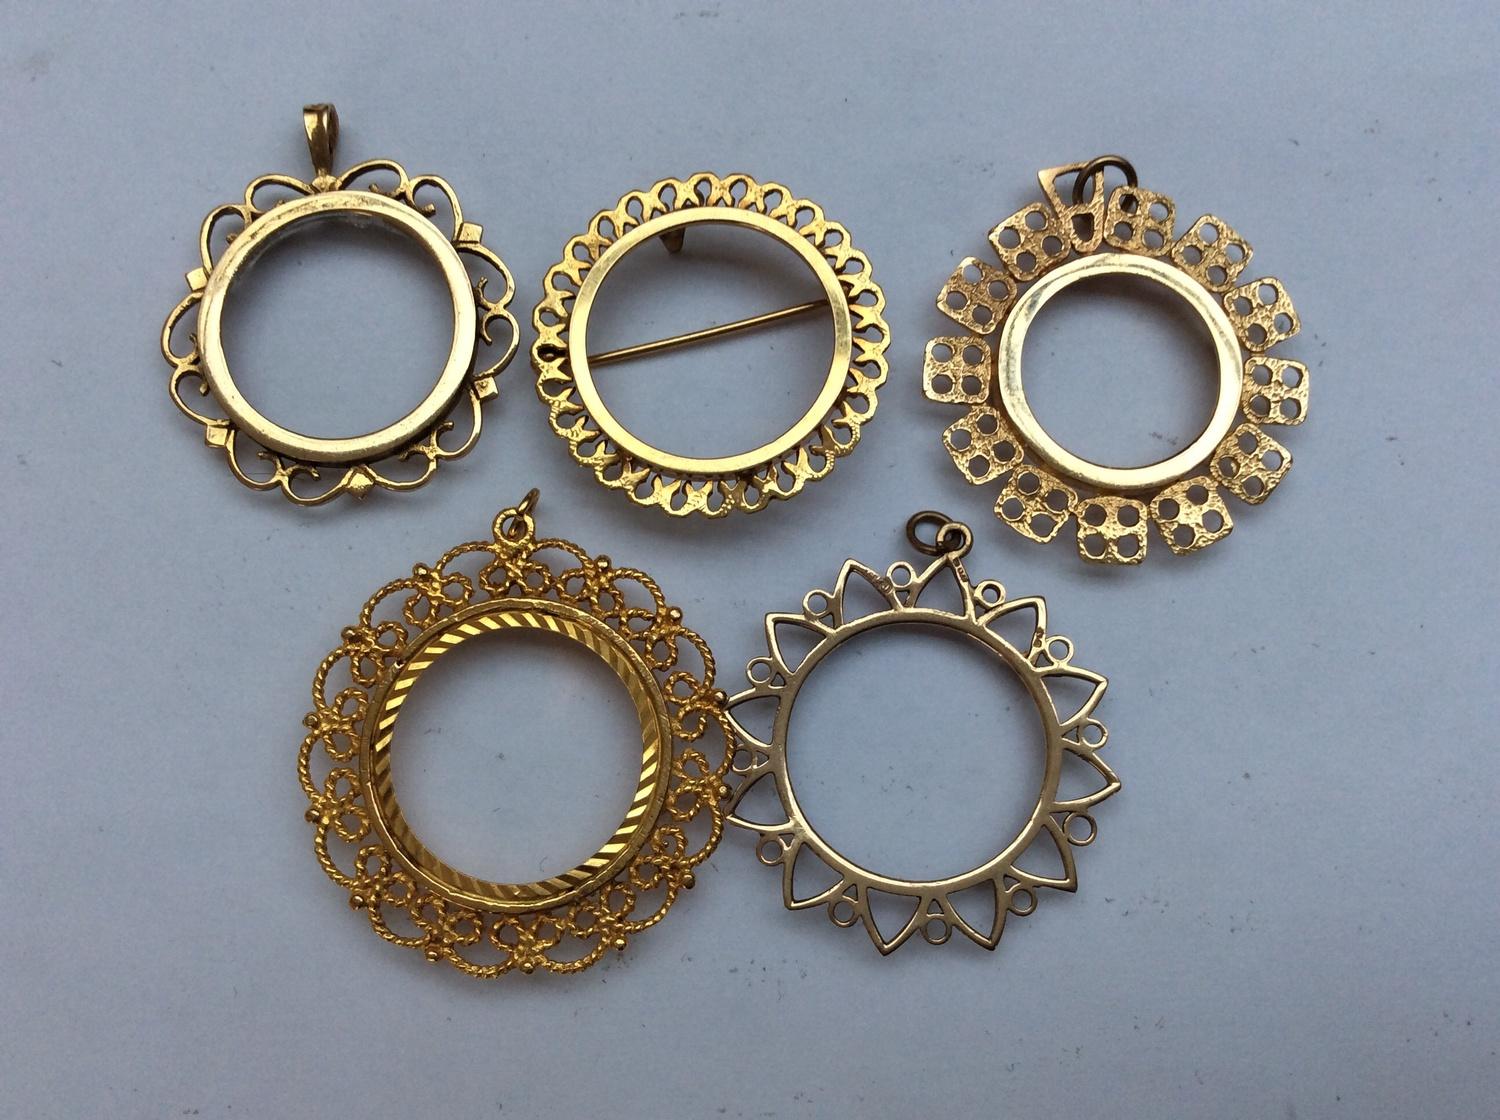 Four 9ct gold sovereign mounts and a 9ct gold half sovereign mount, 16.90g